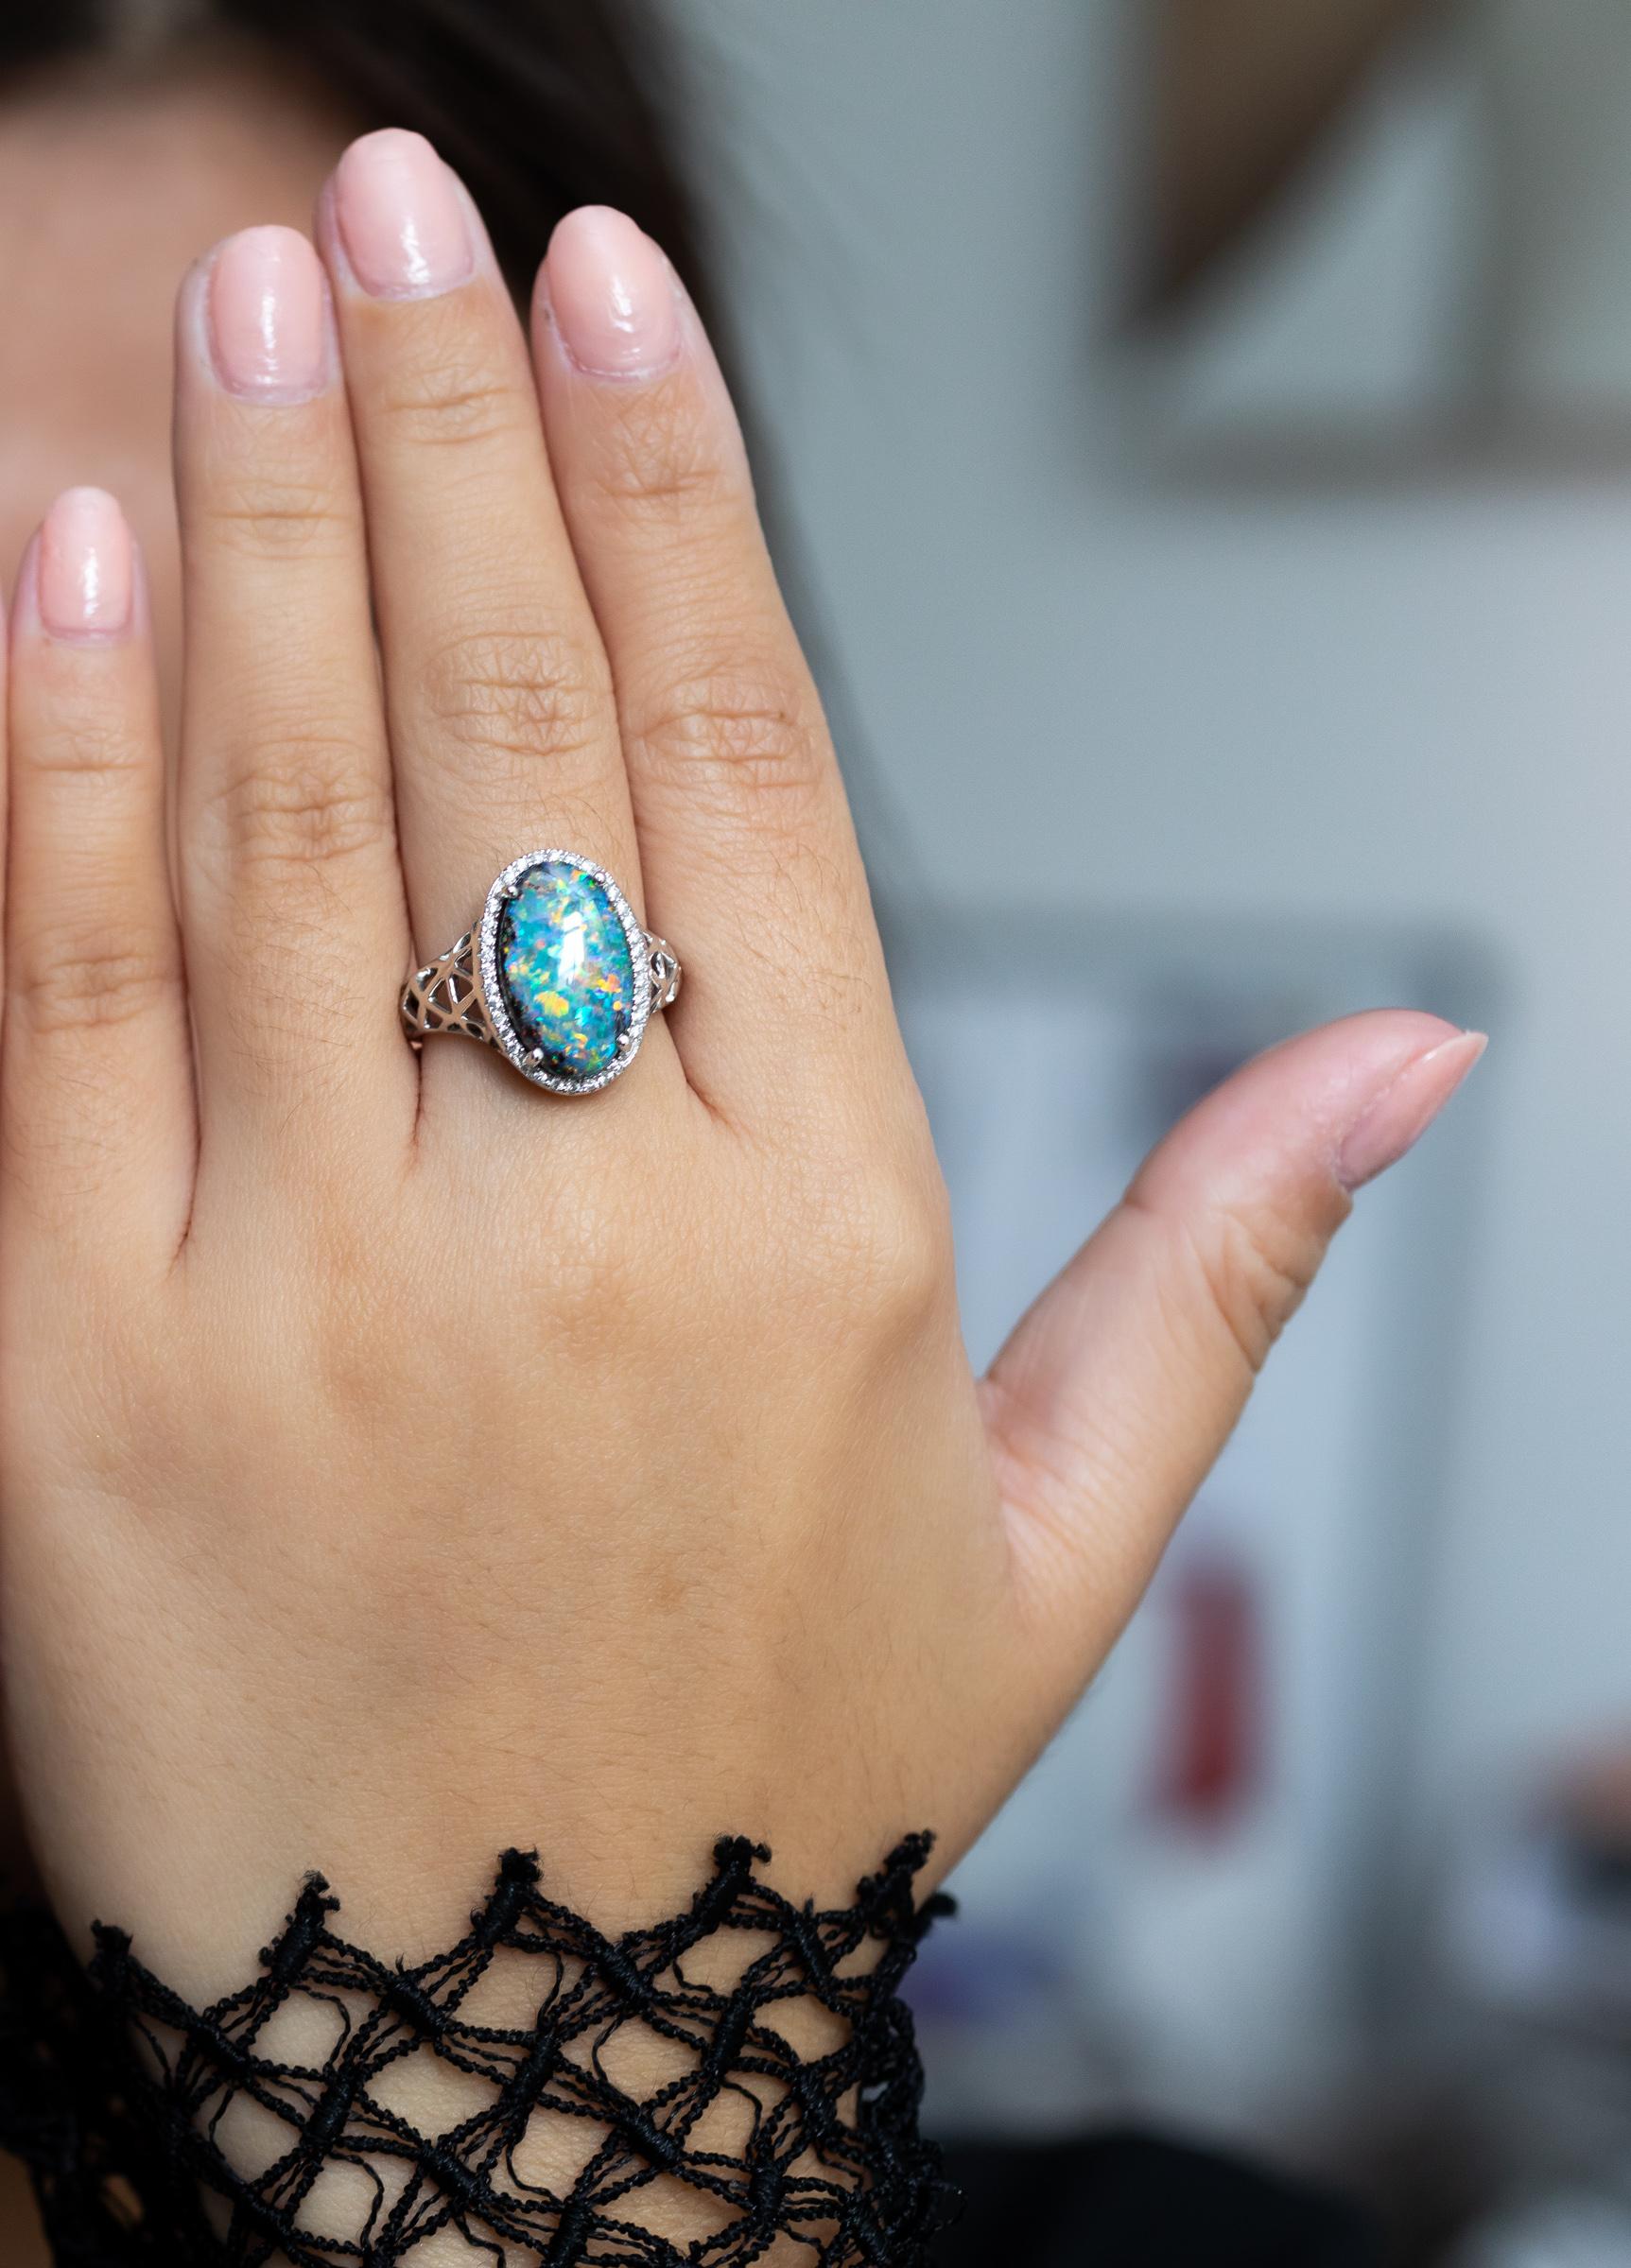 A multi-coloured Australian natural opal (4.56ct) is the heart of the “Juliette” opal ring. The intricate 18K white gold setting and a sparkle of 32 diamonds add another dimension to the opal sourced from our very own mines in Jundah-Opalville. One